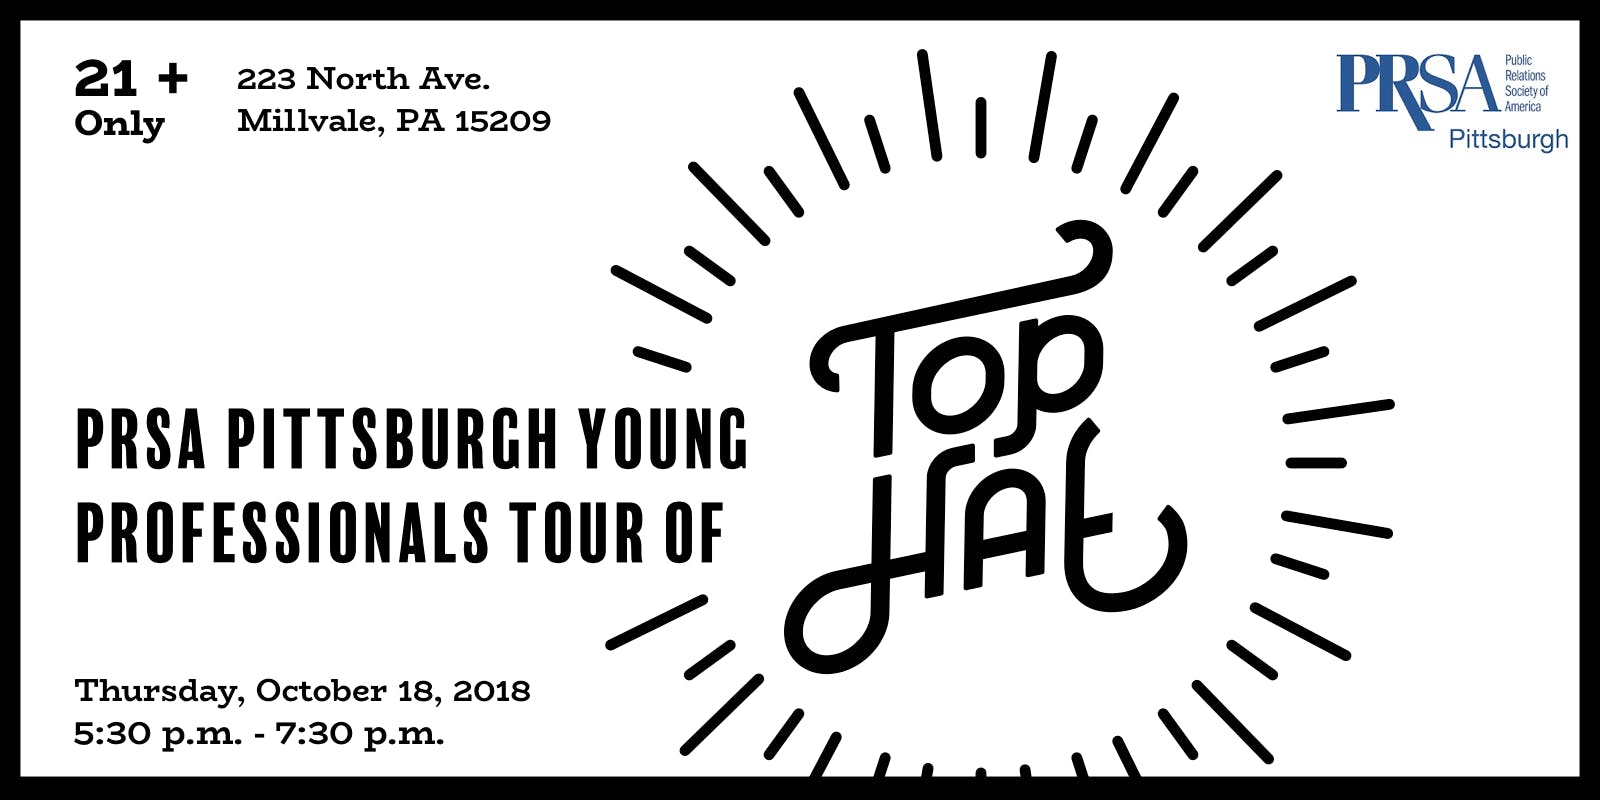 PRSA Pittsburgh Young Professionals Tour of Top Hat (21+ Only!)